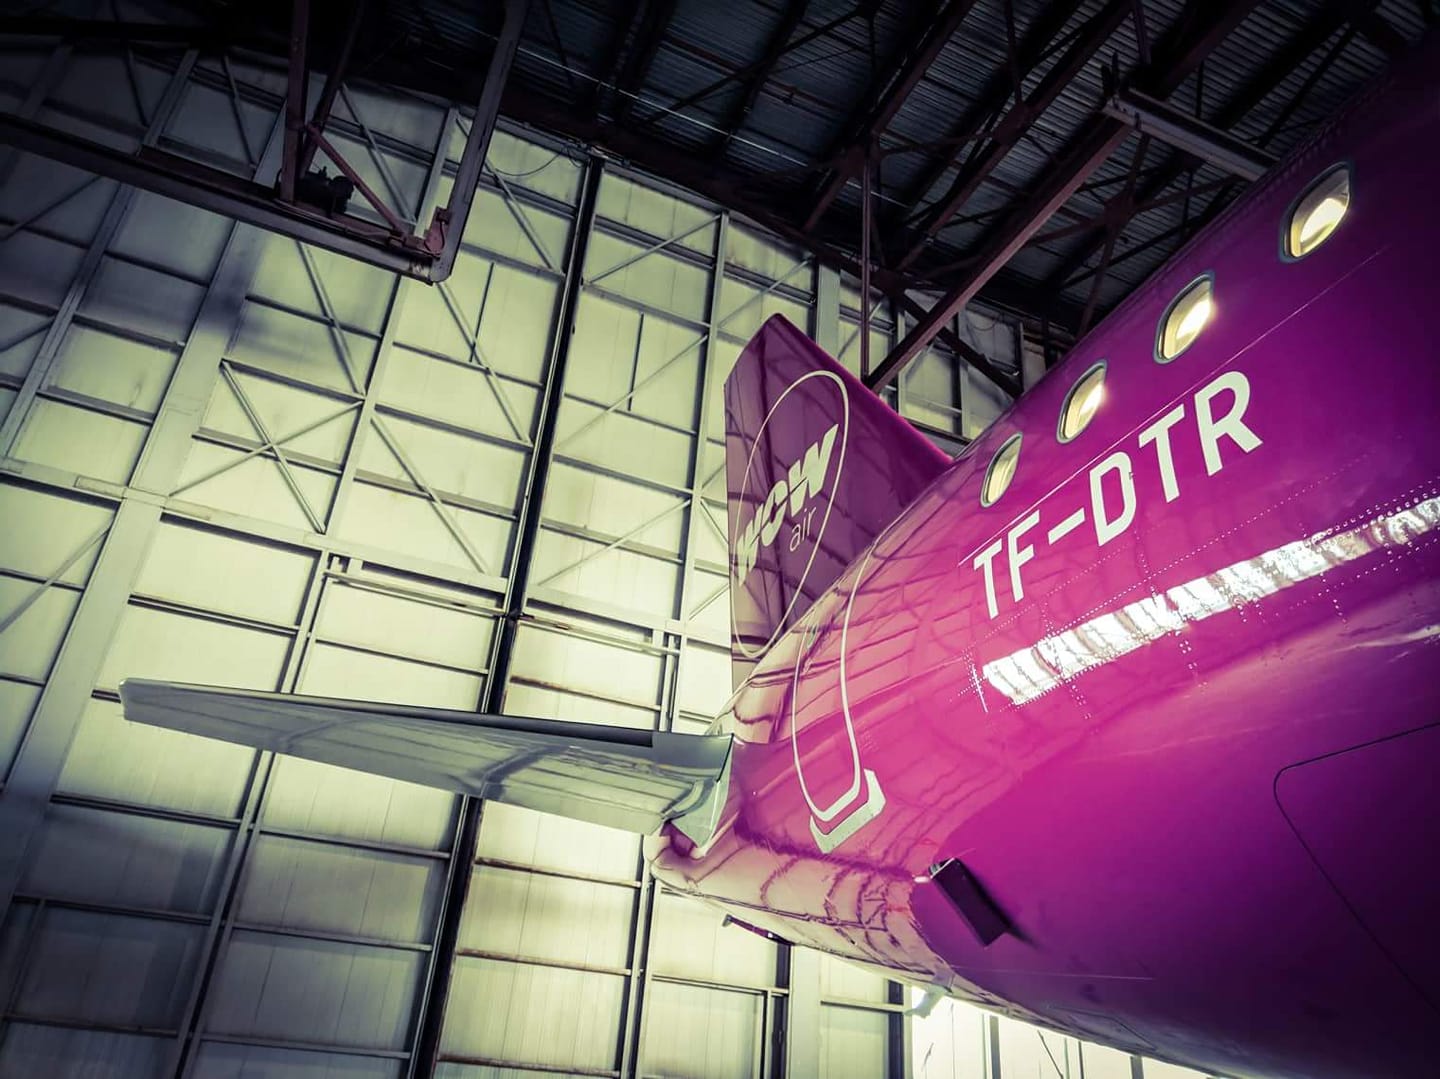 Brand new tail in Keflavík - WOW air Airbus A321-253neo TF-DTR // Source: Flugblogg's source in the airport